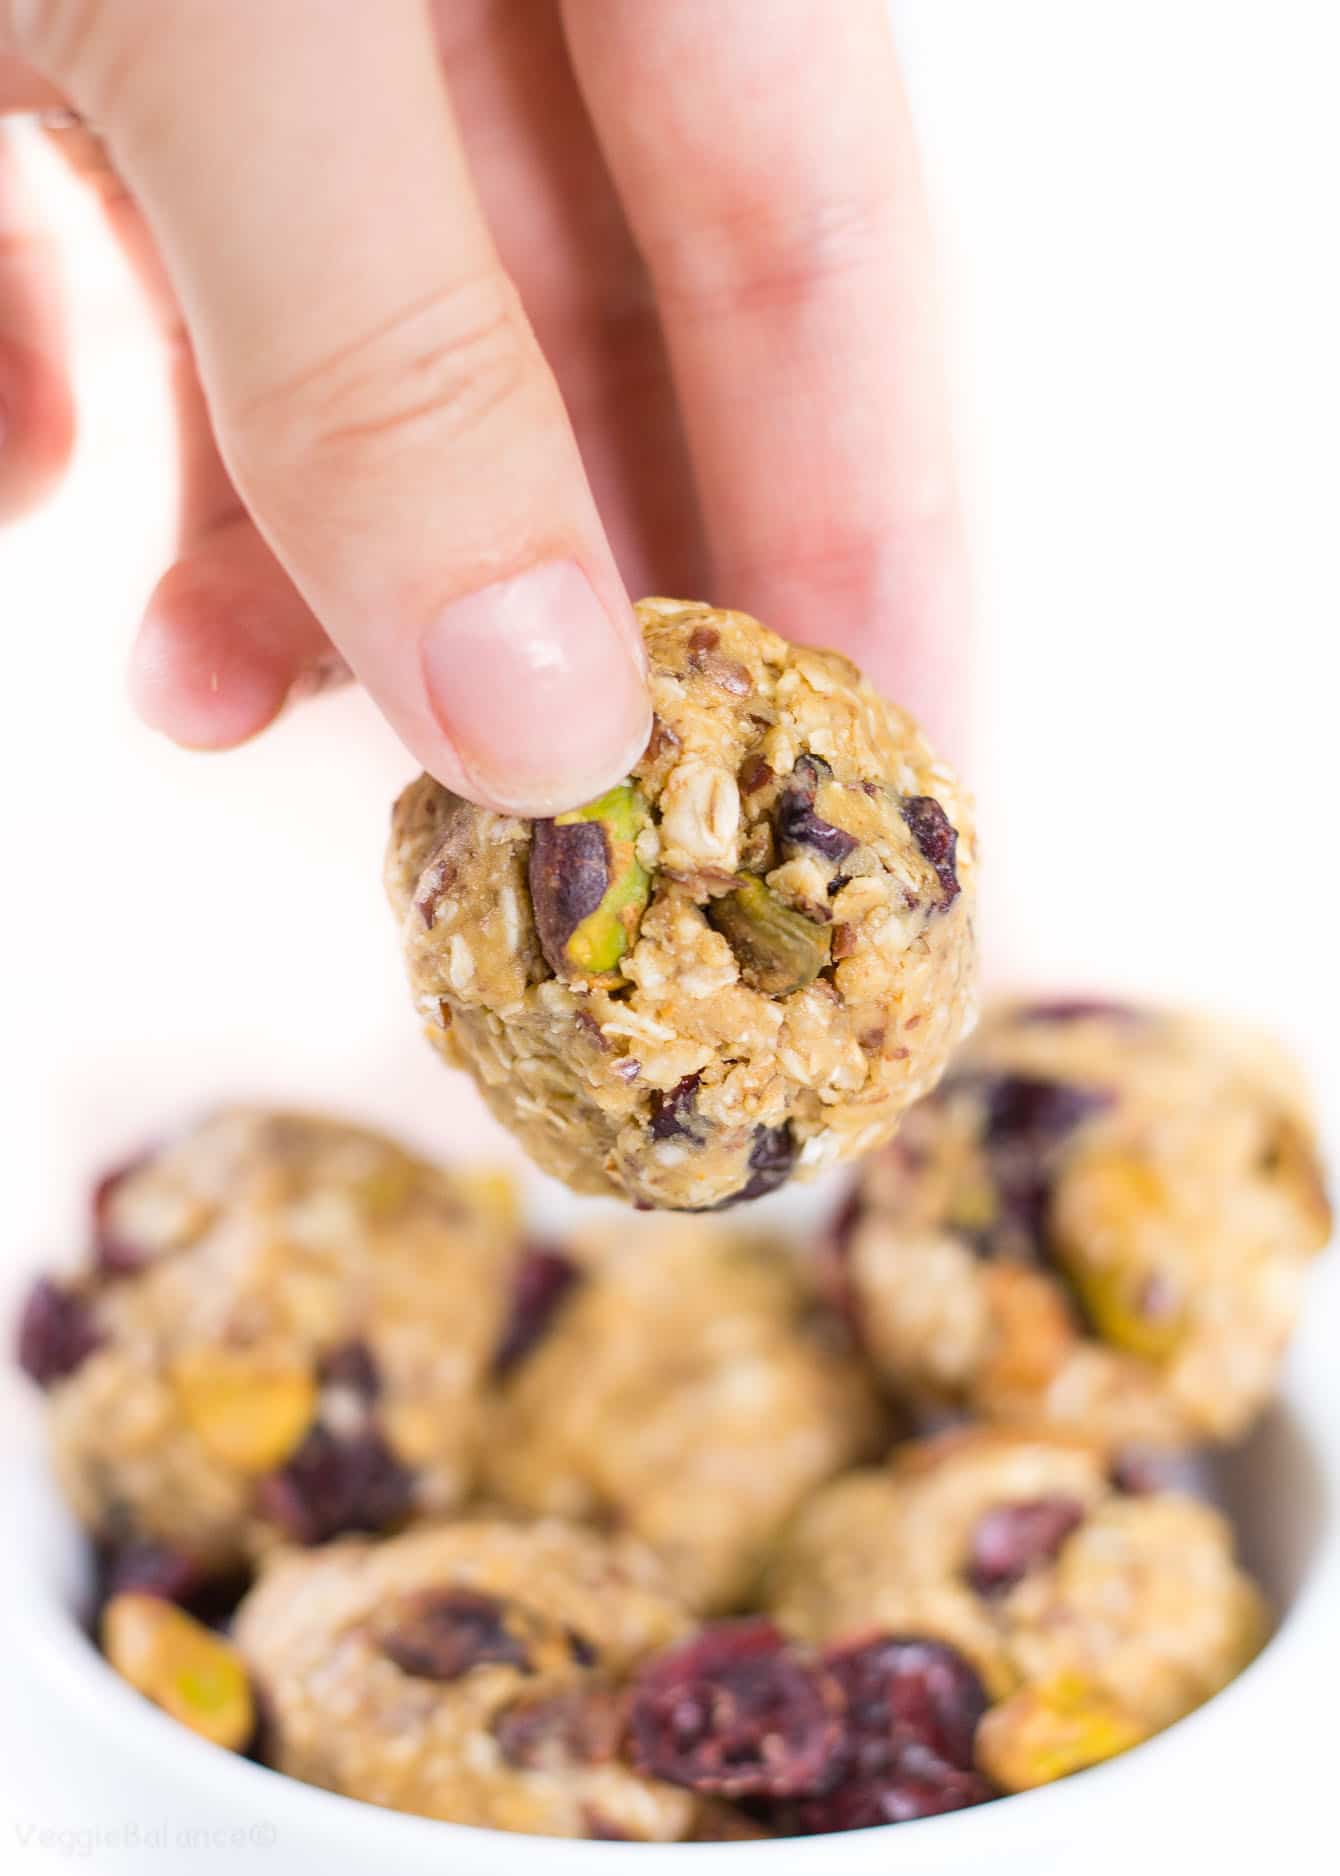 Cranberry Pistachio Energy Bites bring the business of getting up and going within reach.